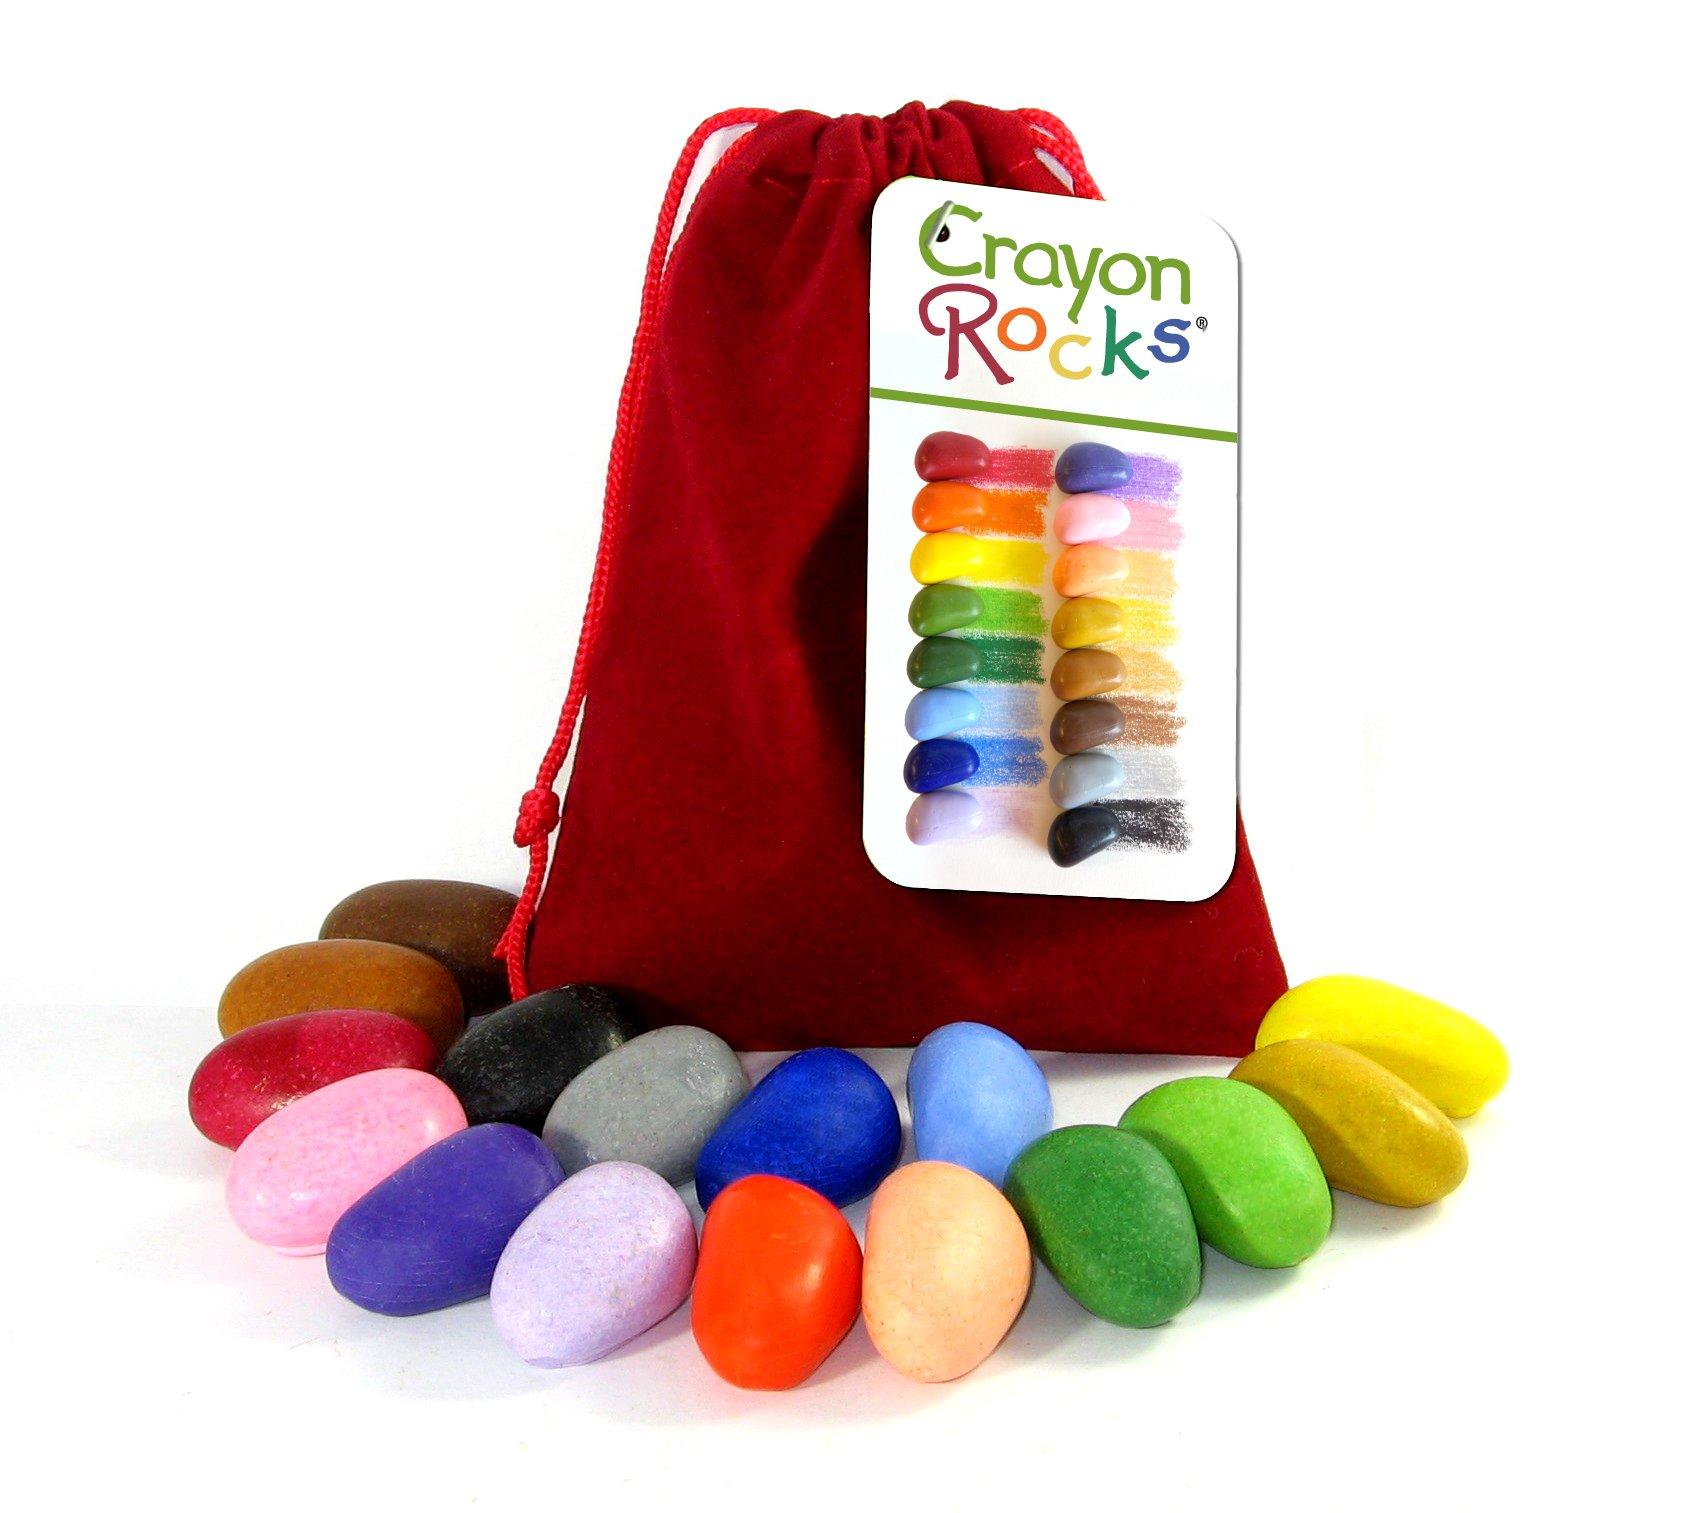  Crayon Rocks, Crayons in a Rock Shape, 8 Colors, Tripod Grip  Made For Handwriting Development in Kids and Toddlers, Fun & Educational,  Creative Activity, Comes in a Blue Velvet Bag : Toys & Games